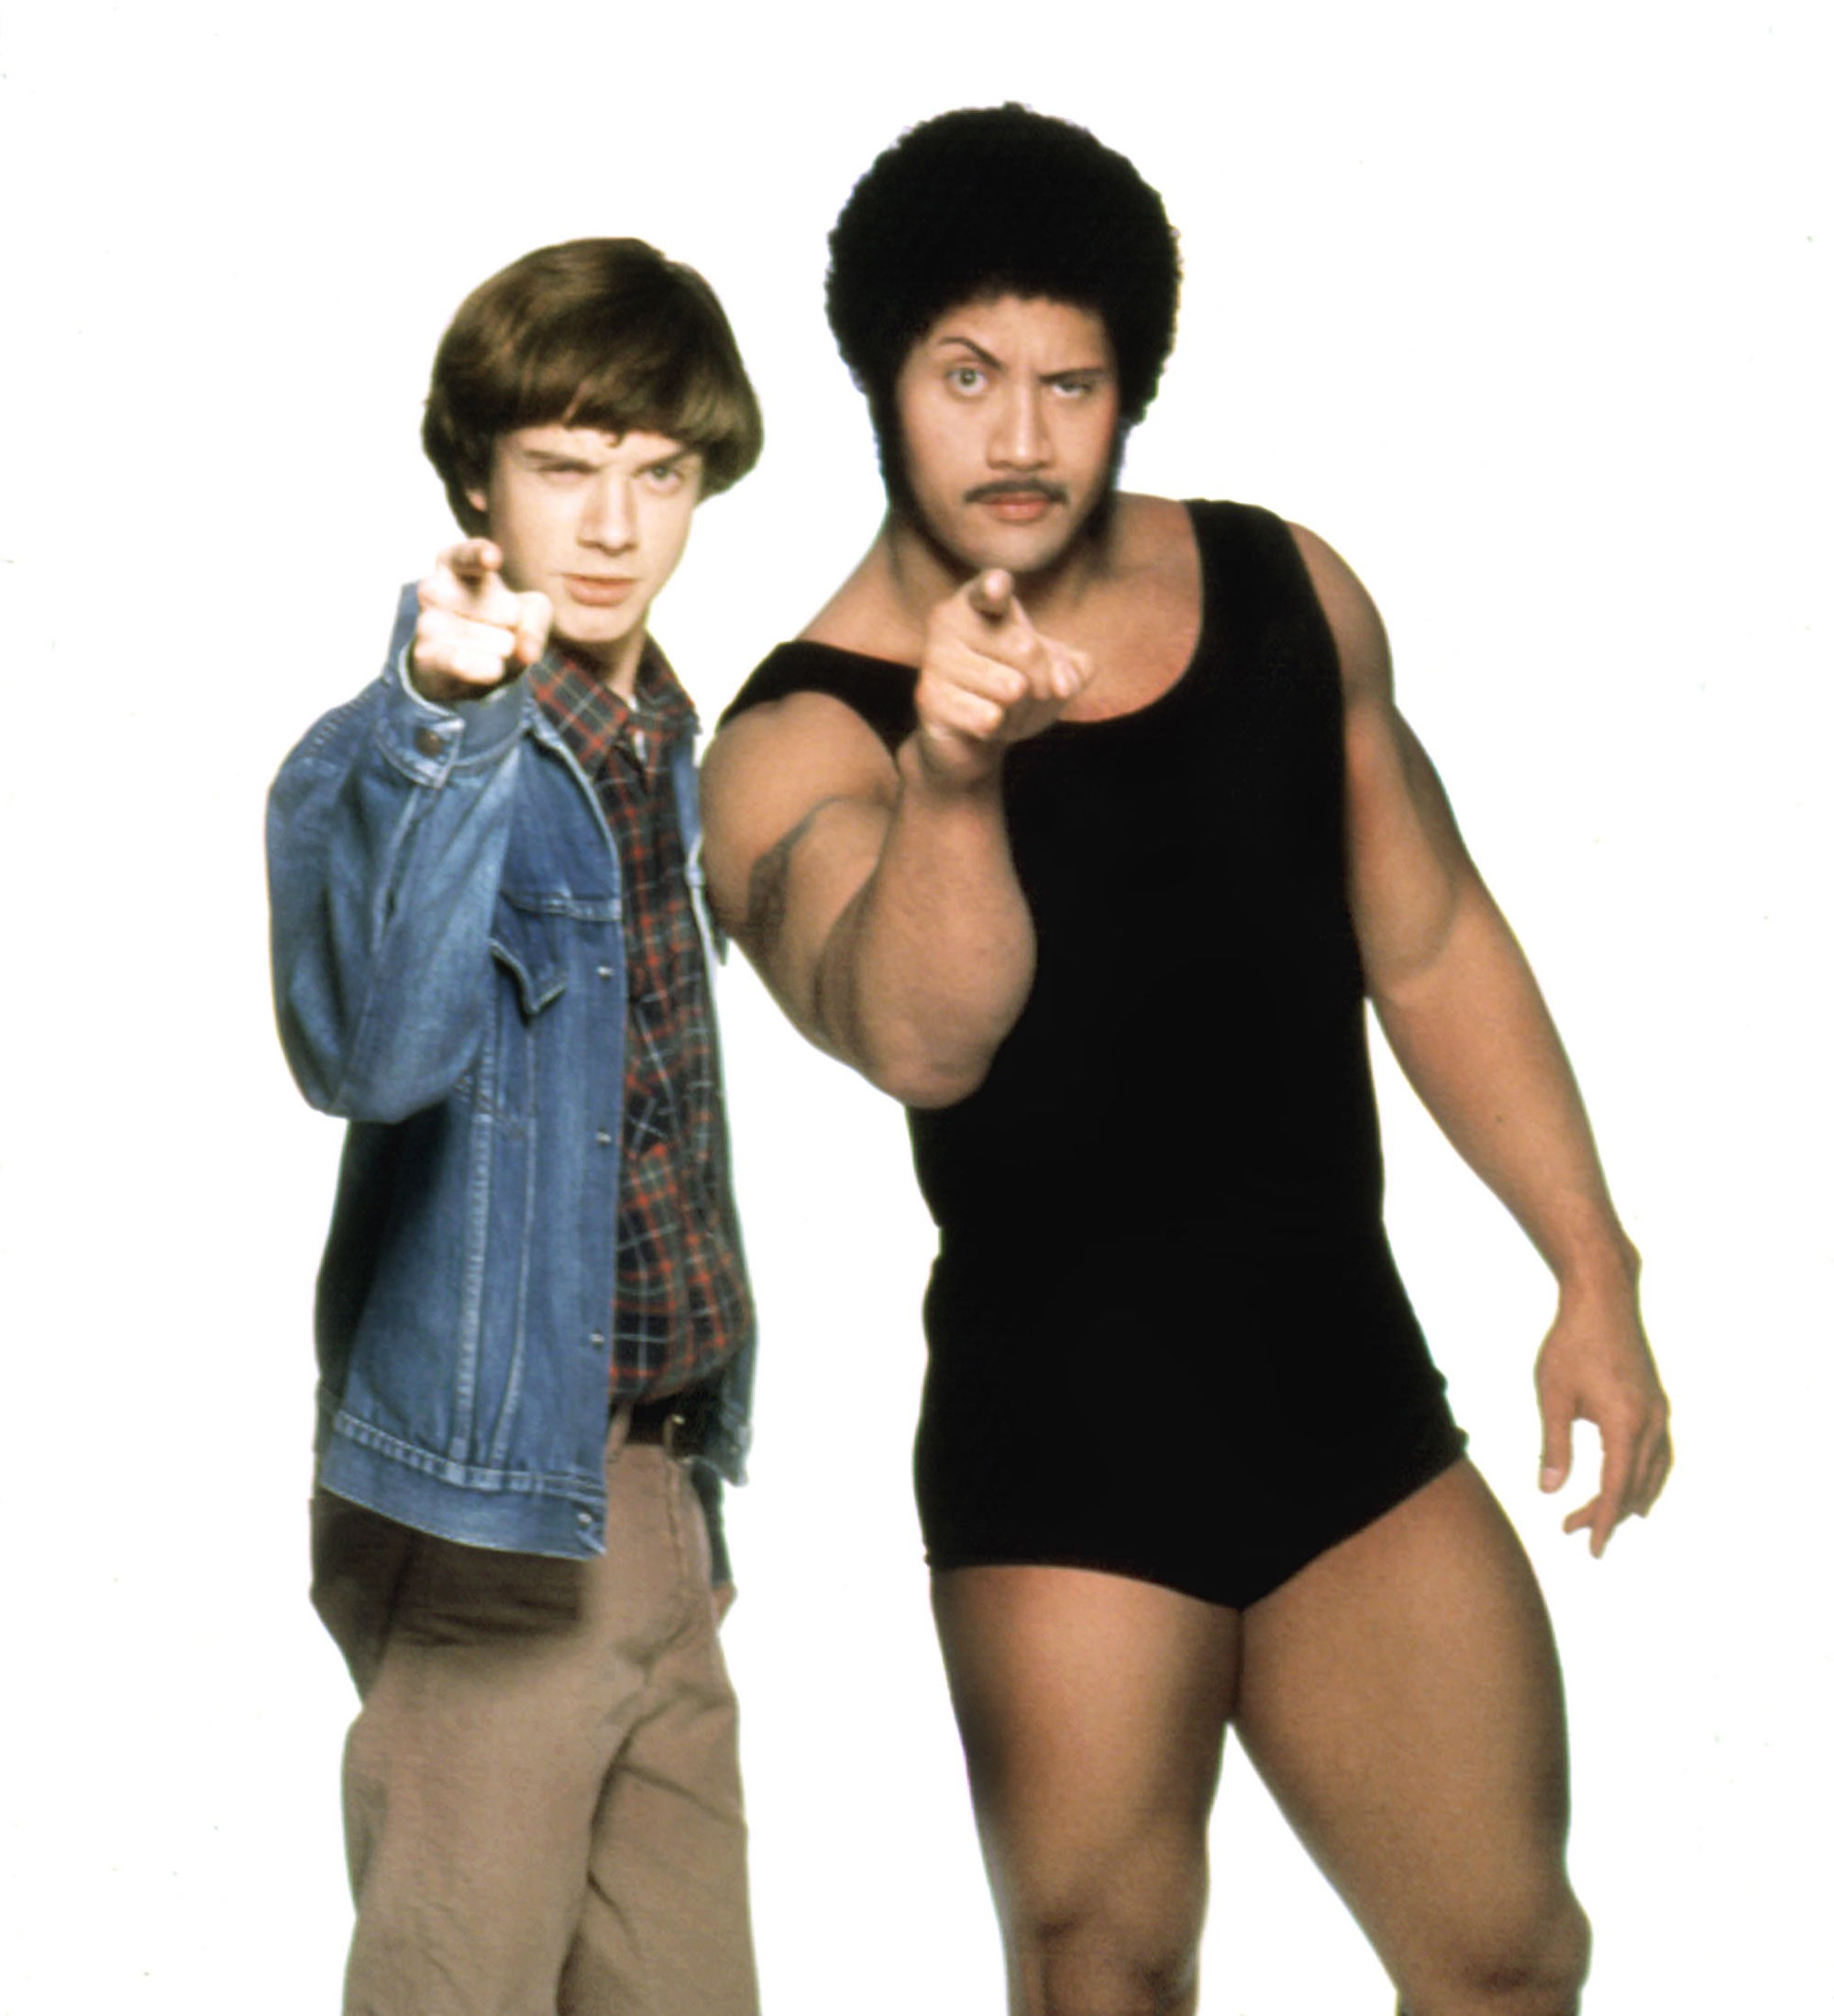 THAT '70s SHOW, Topher Grace, The Rock (aka Dwayne Johnson), 'The Wrestling Show', airing 02/07/99,